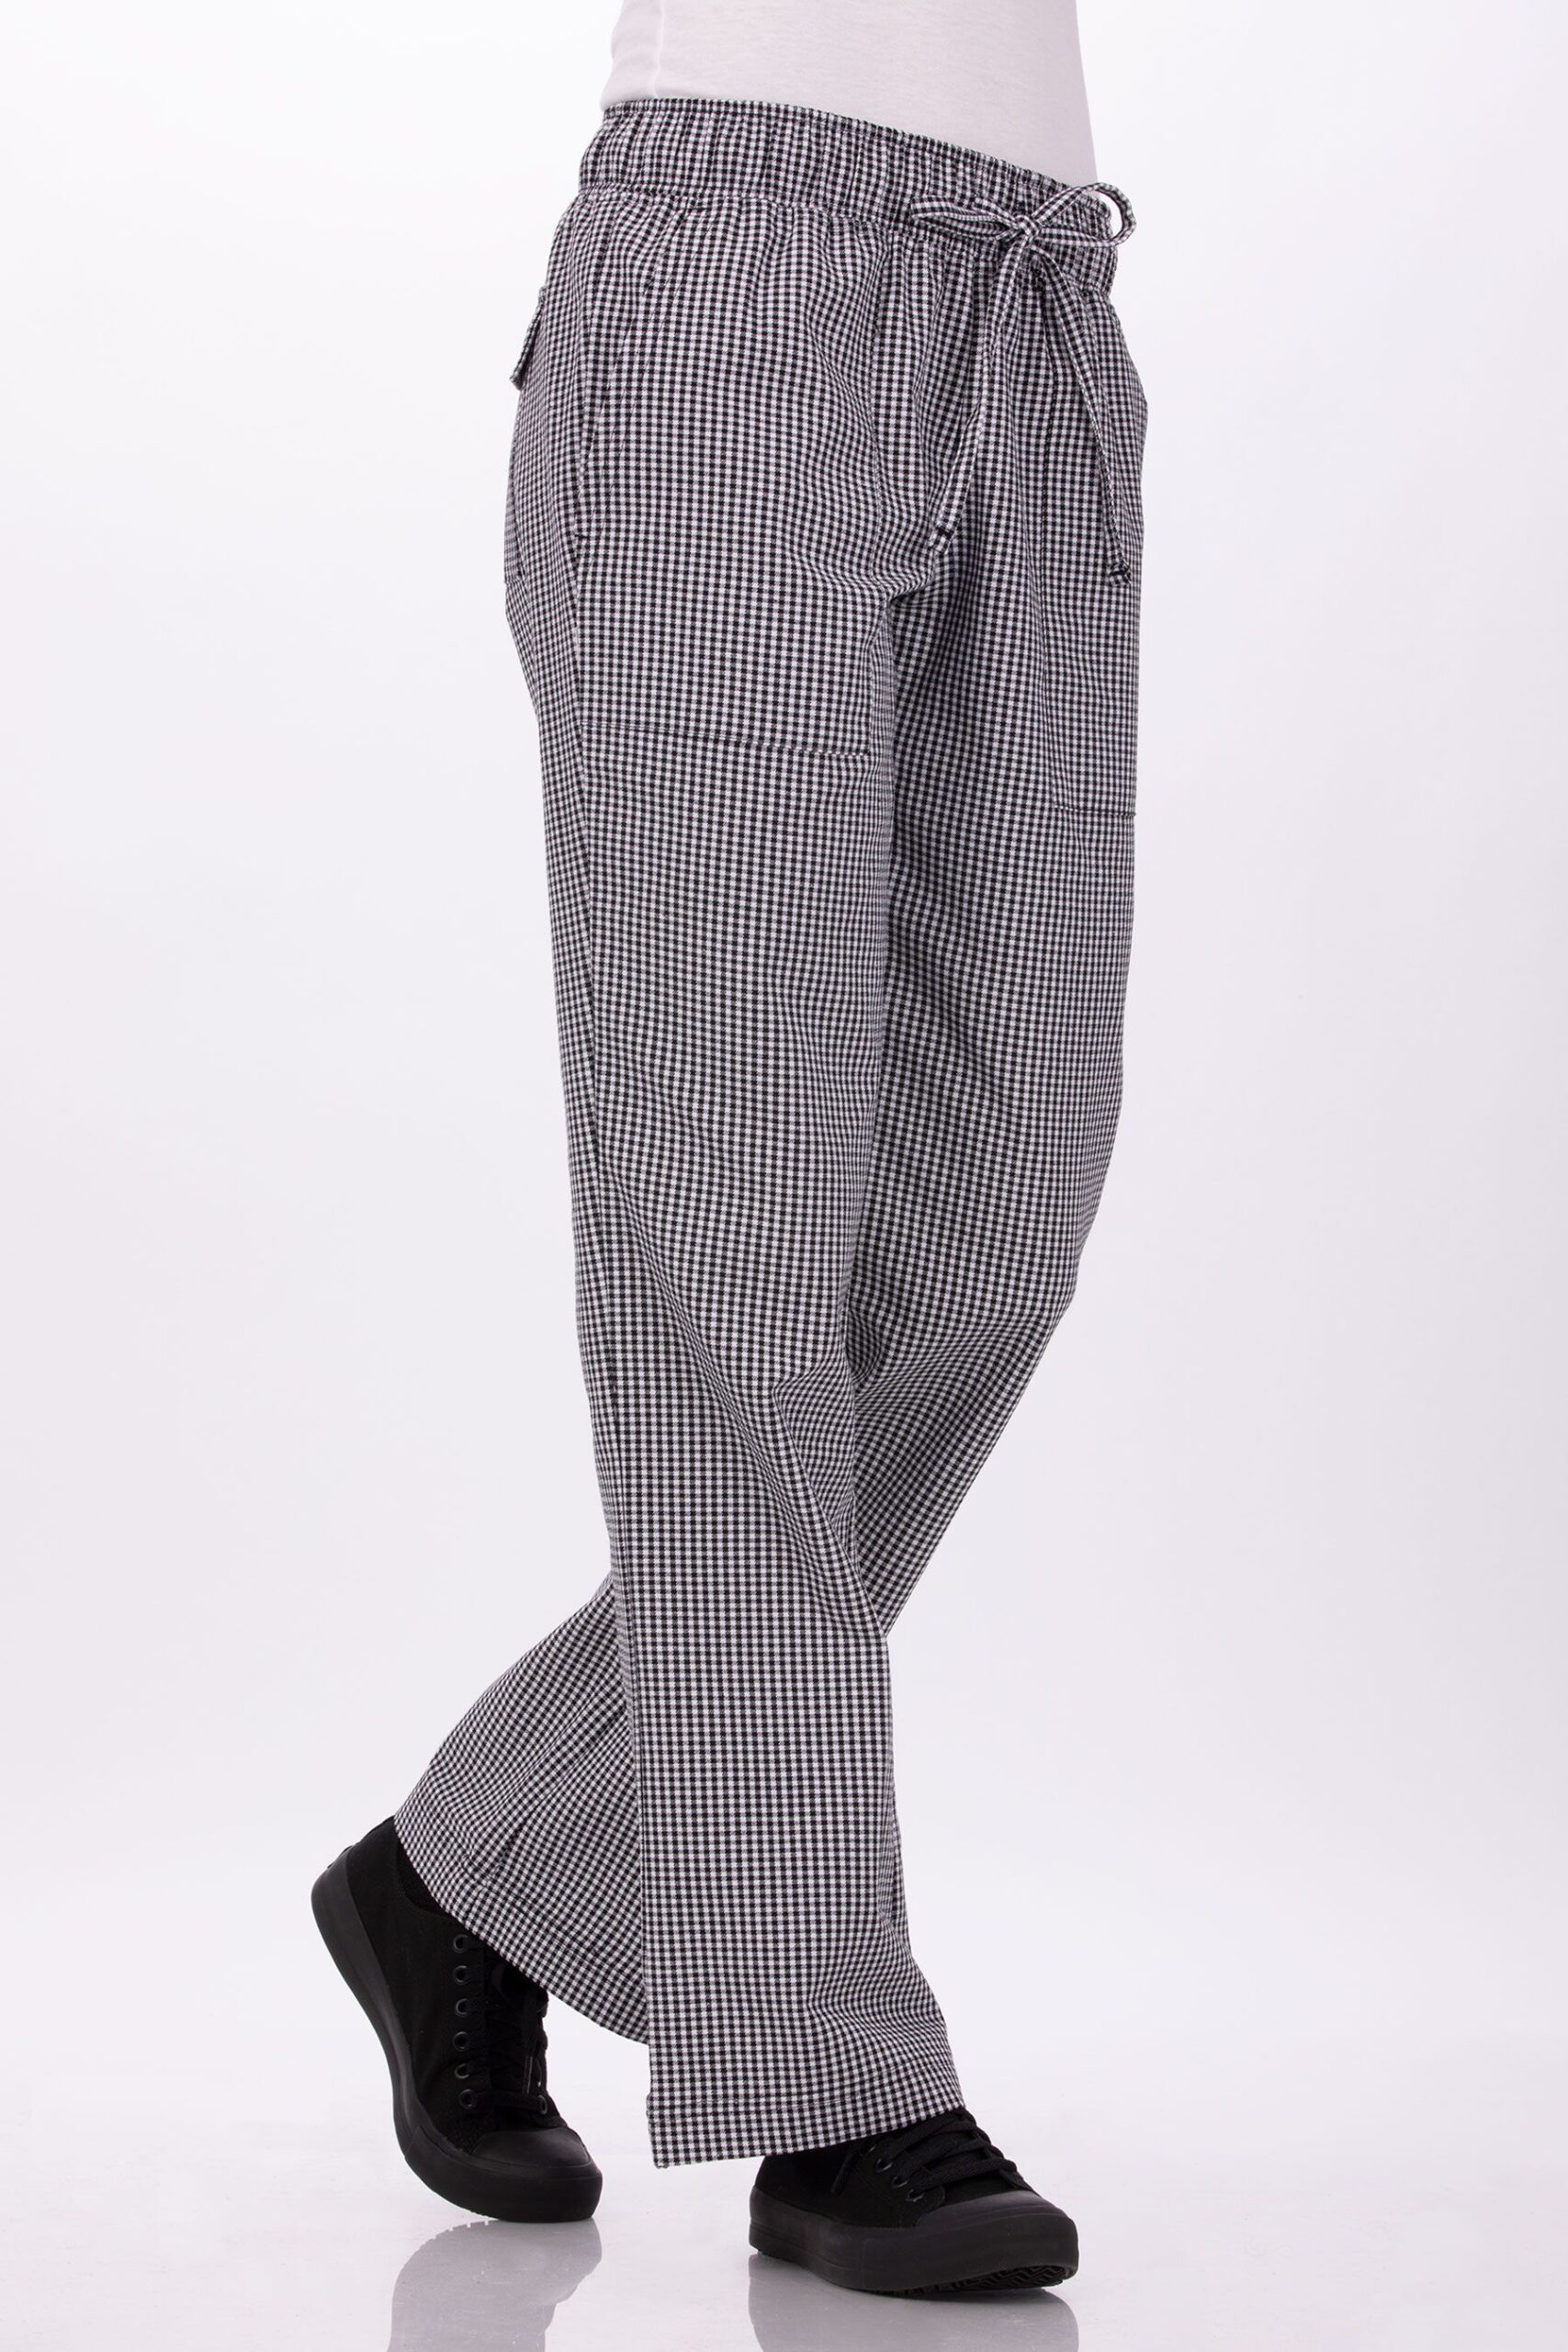 Finally, Chef Pants Designed For Women Racked, 40% OFF